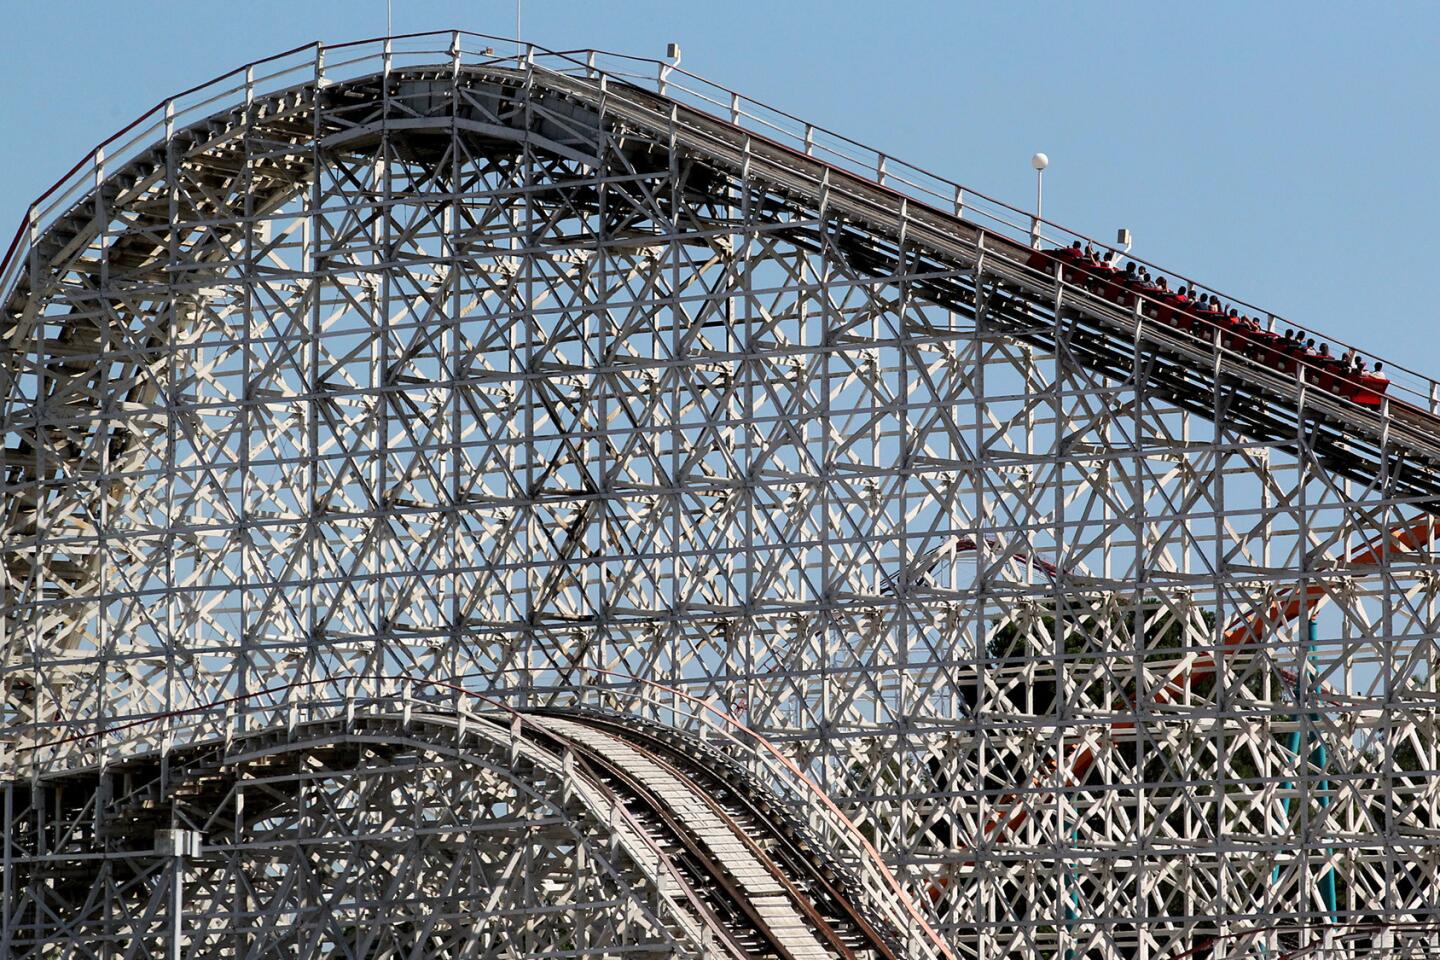 Colossus roller coaster is set to close